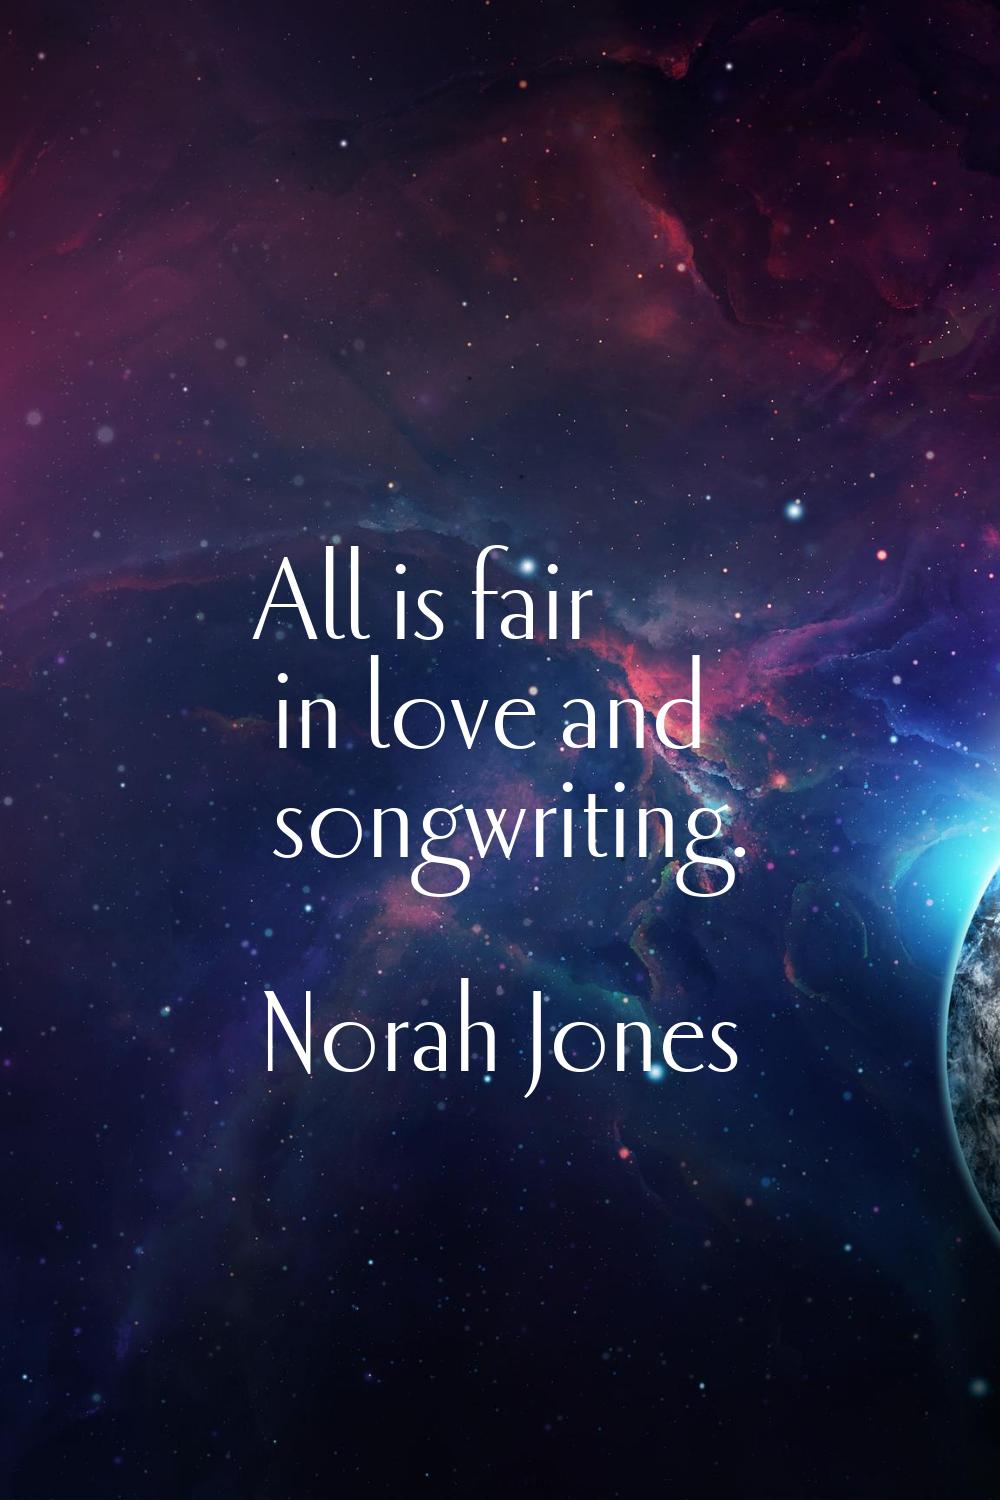 All is fair in love and songwriting.